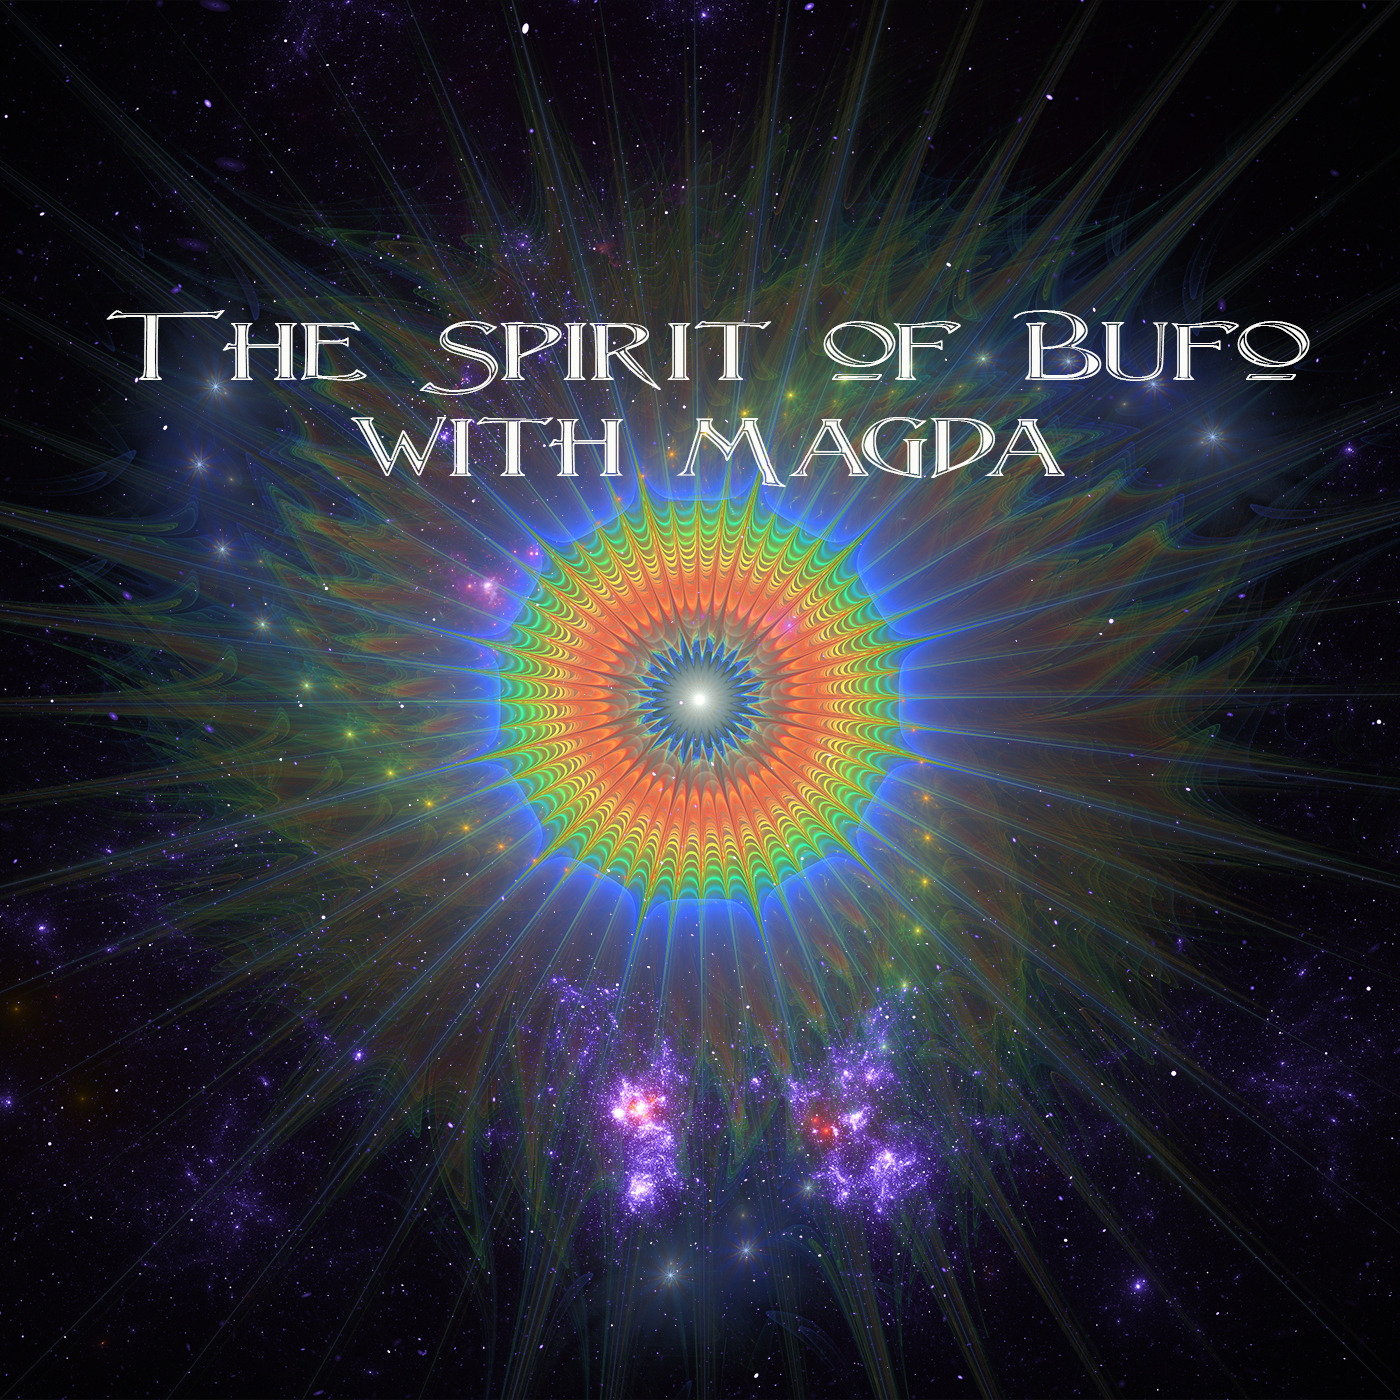 Episode 172: The Spirit of Bufo with Magda